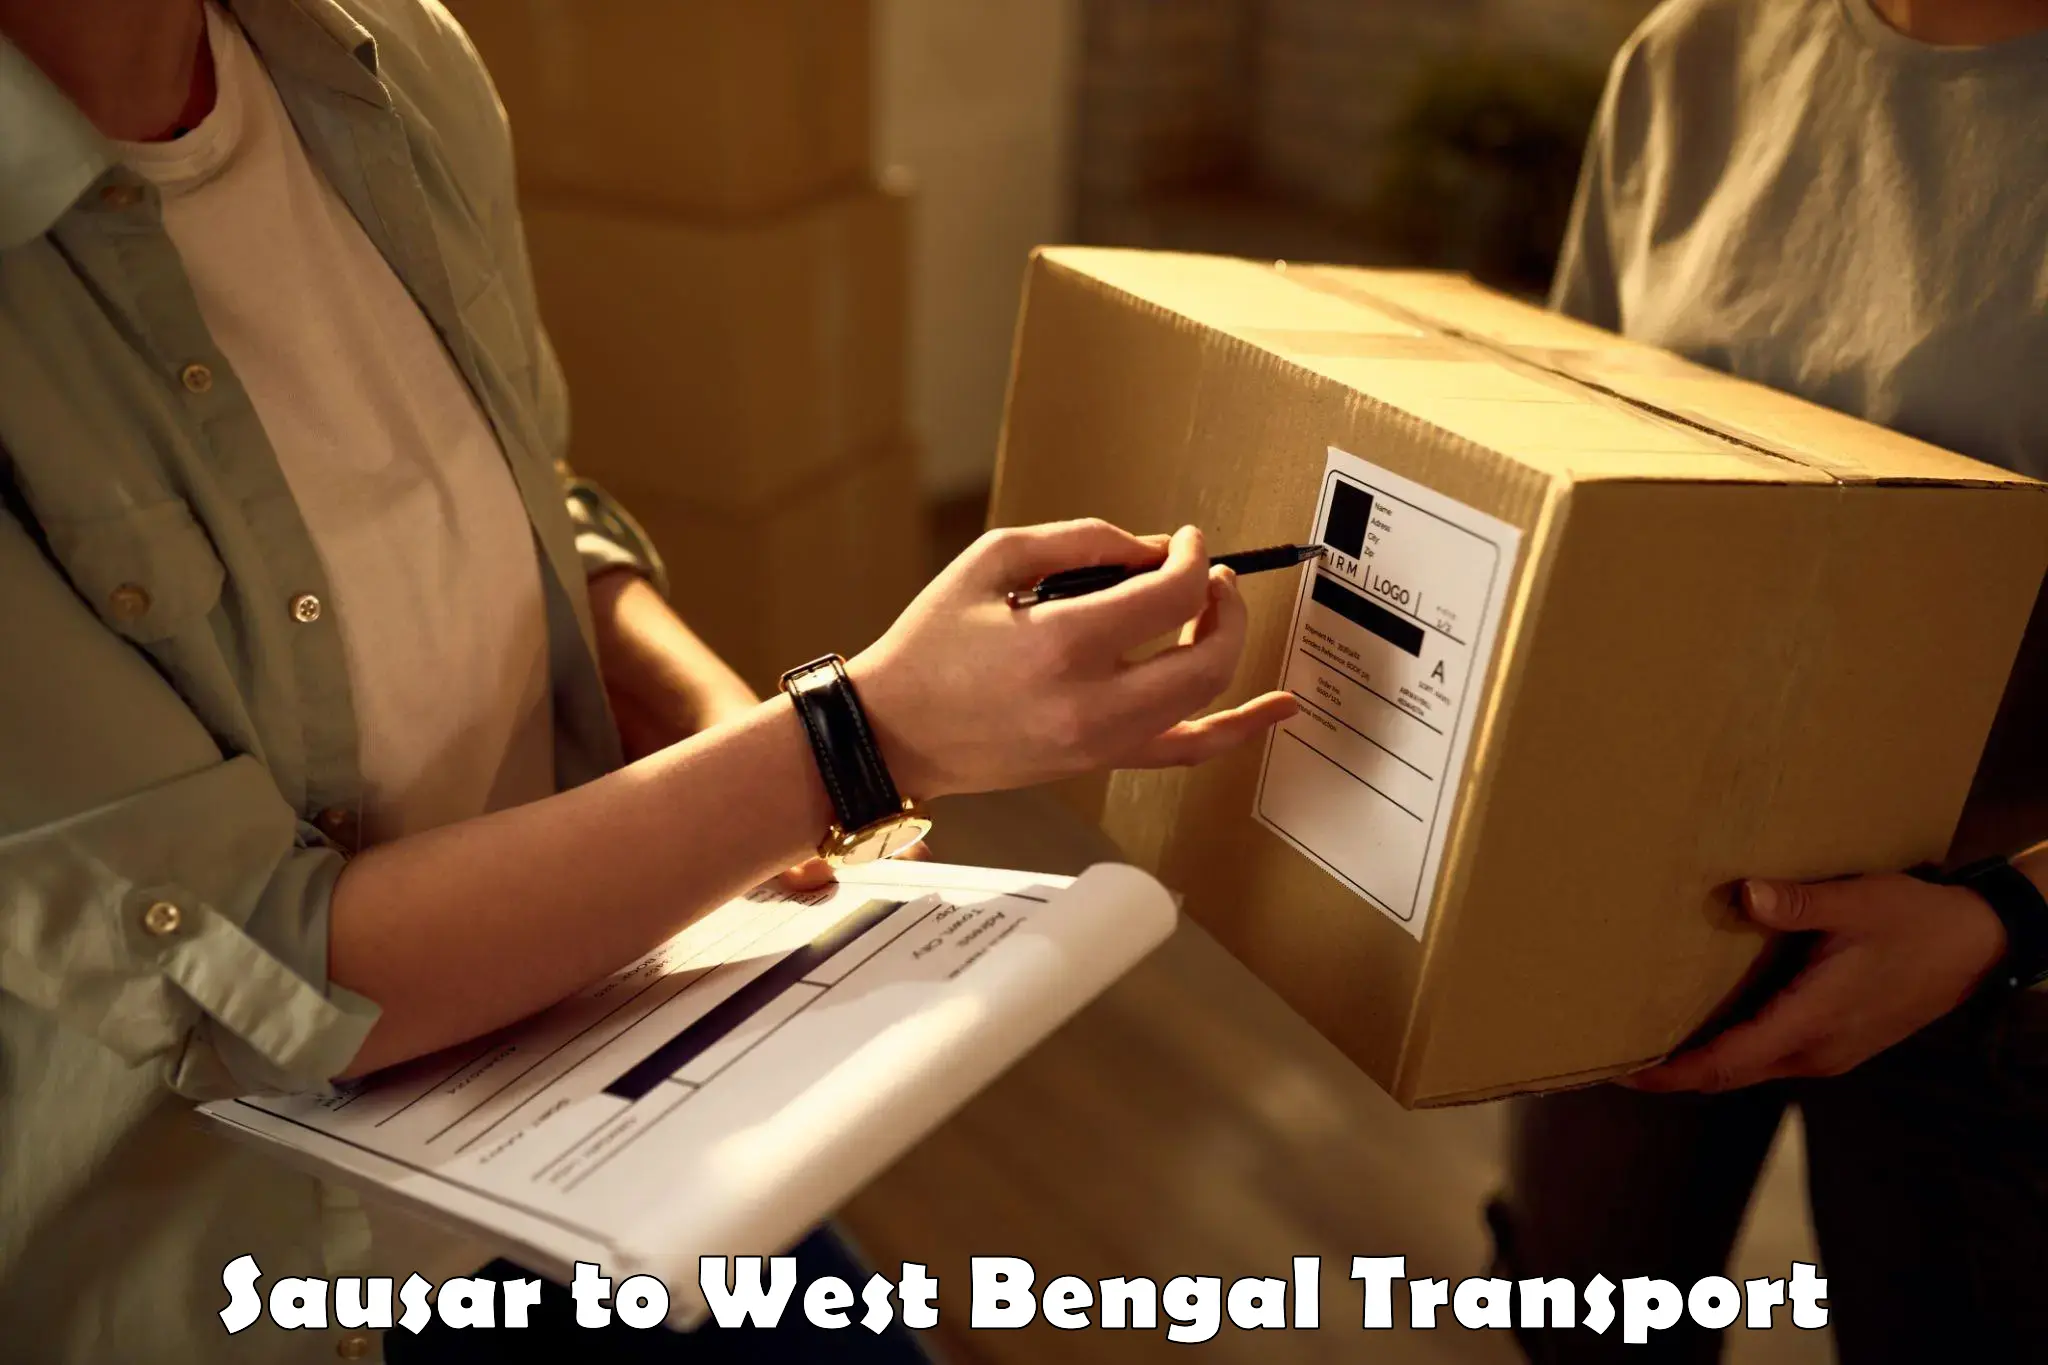 Online transport service Sausar to Hooghly